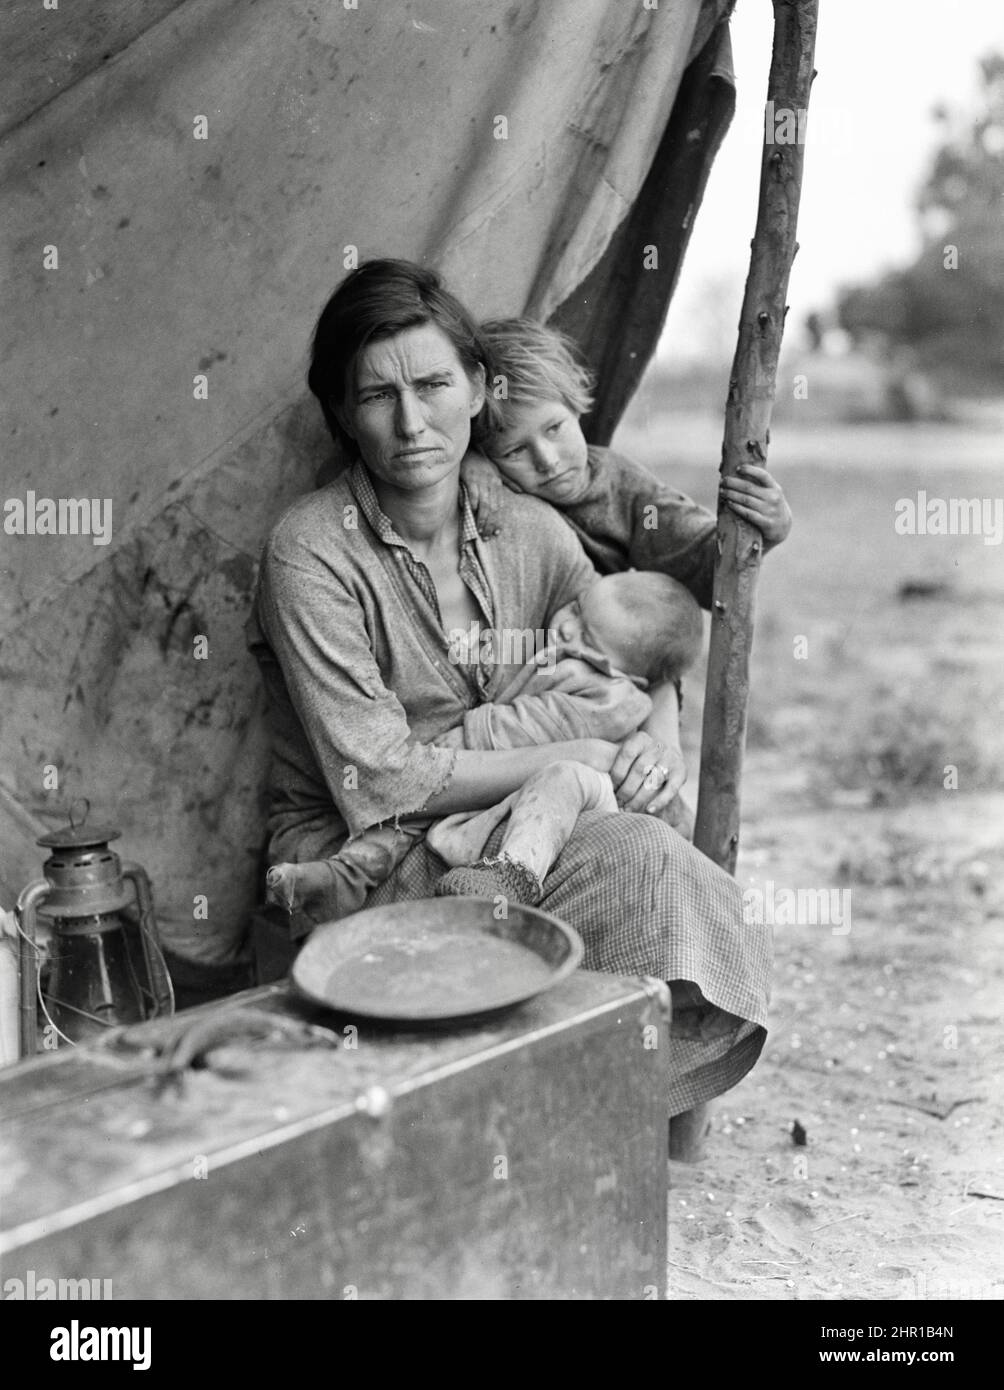 Dorothea Lange Iconic Migrant Mother” came to symbolize the hunger, poverty and hopelessness endured by so many Americans during the Great Depression. Stock Photo